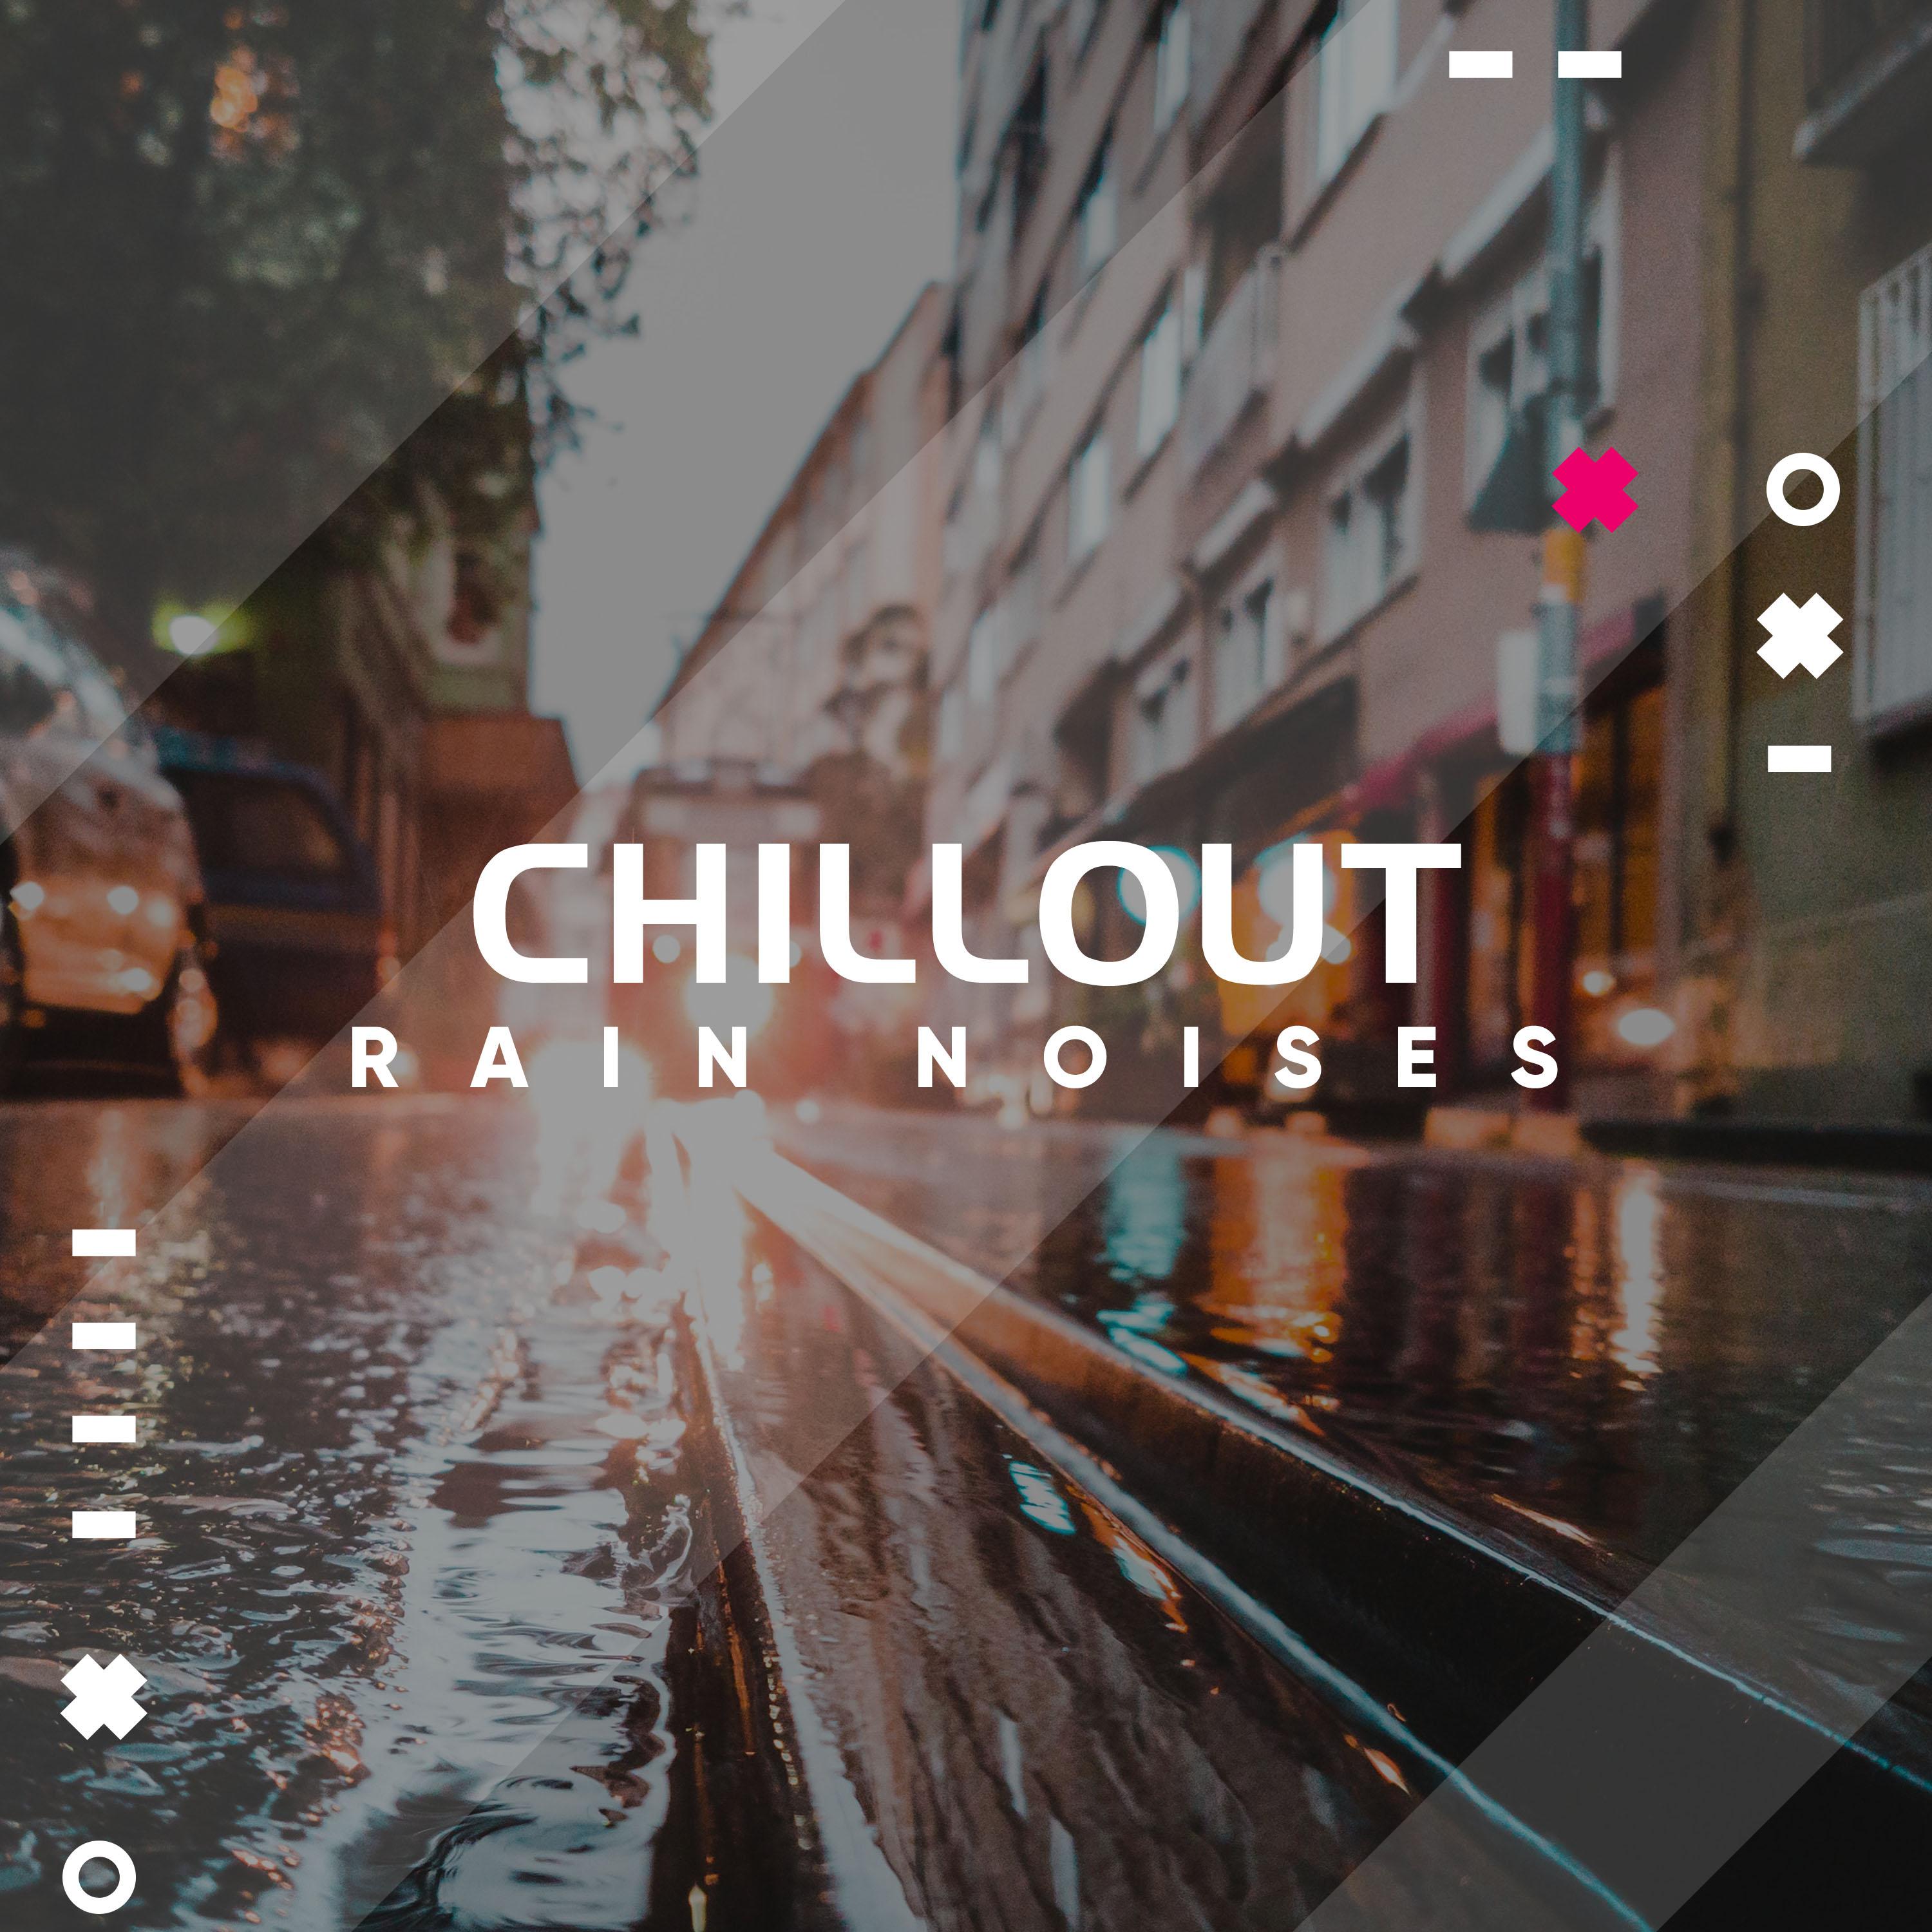 15 Chillout Rain Noises for Ultimate Relaxation